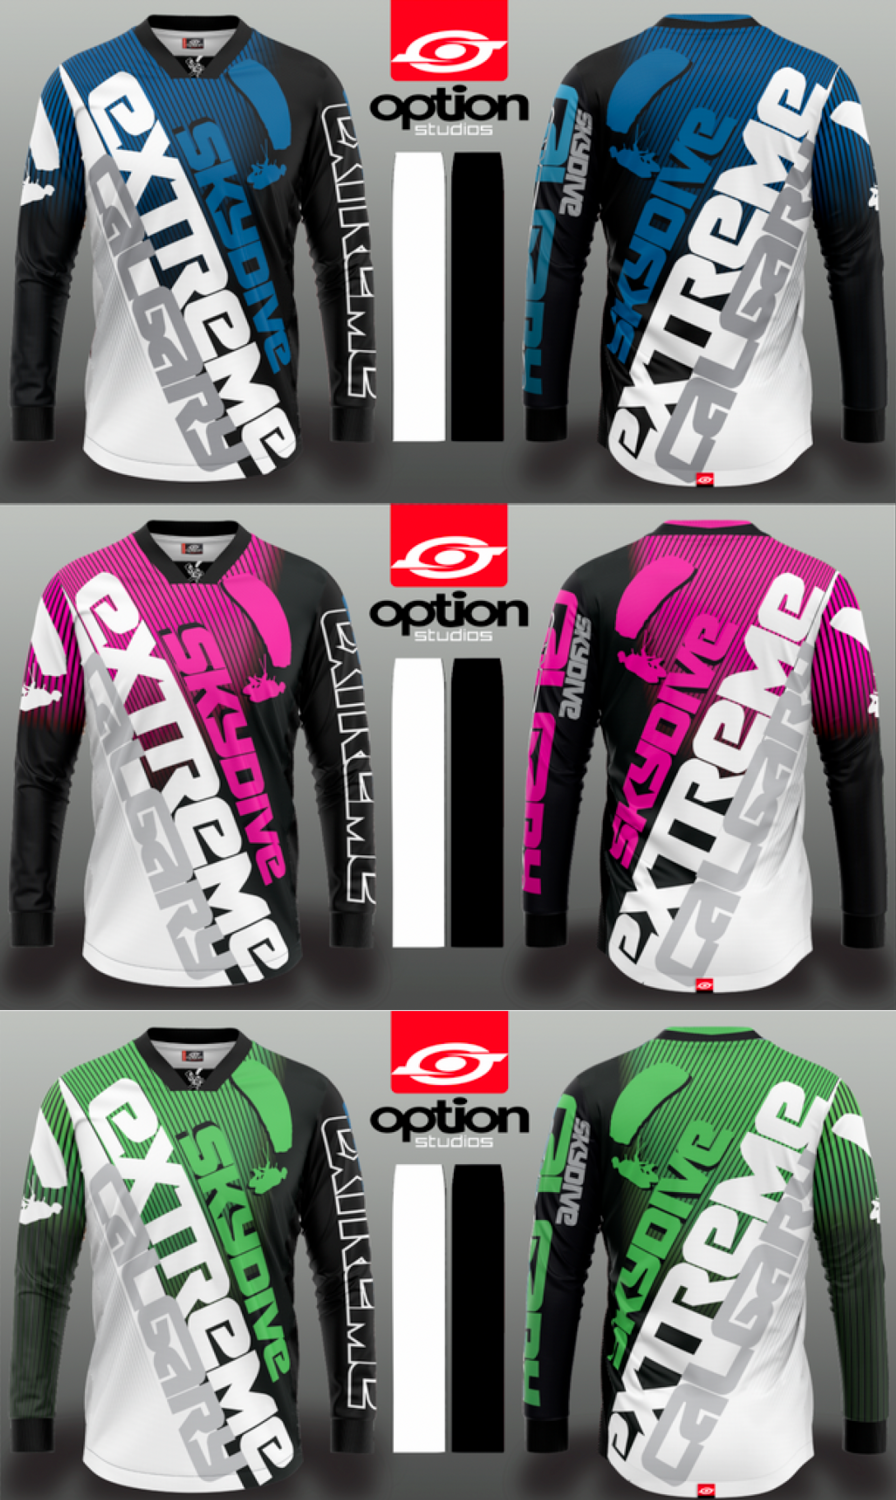 Skydive Jersey by Option Studios.